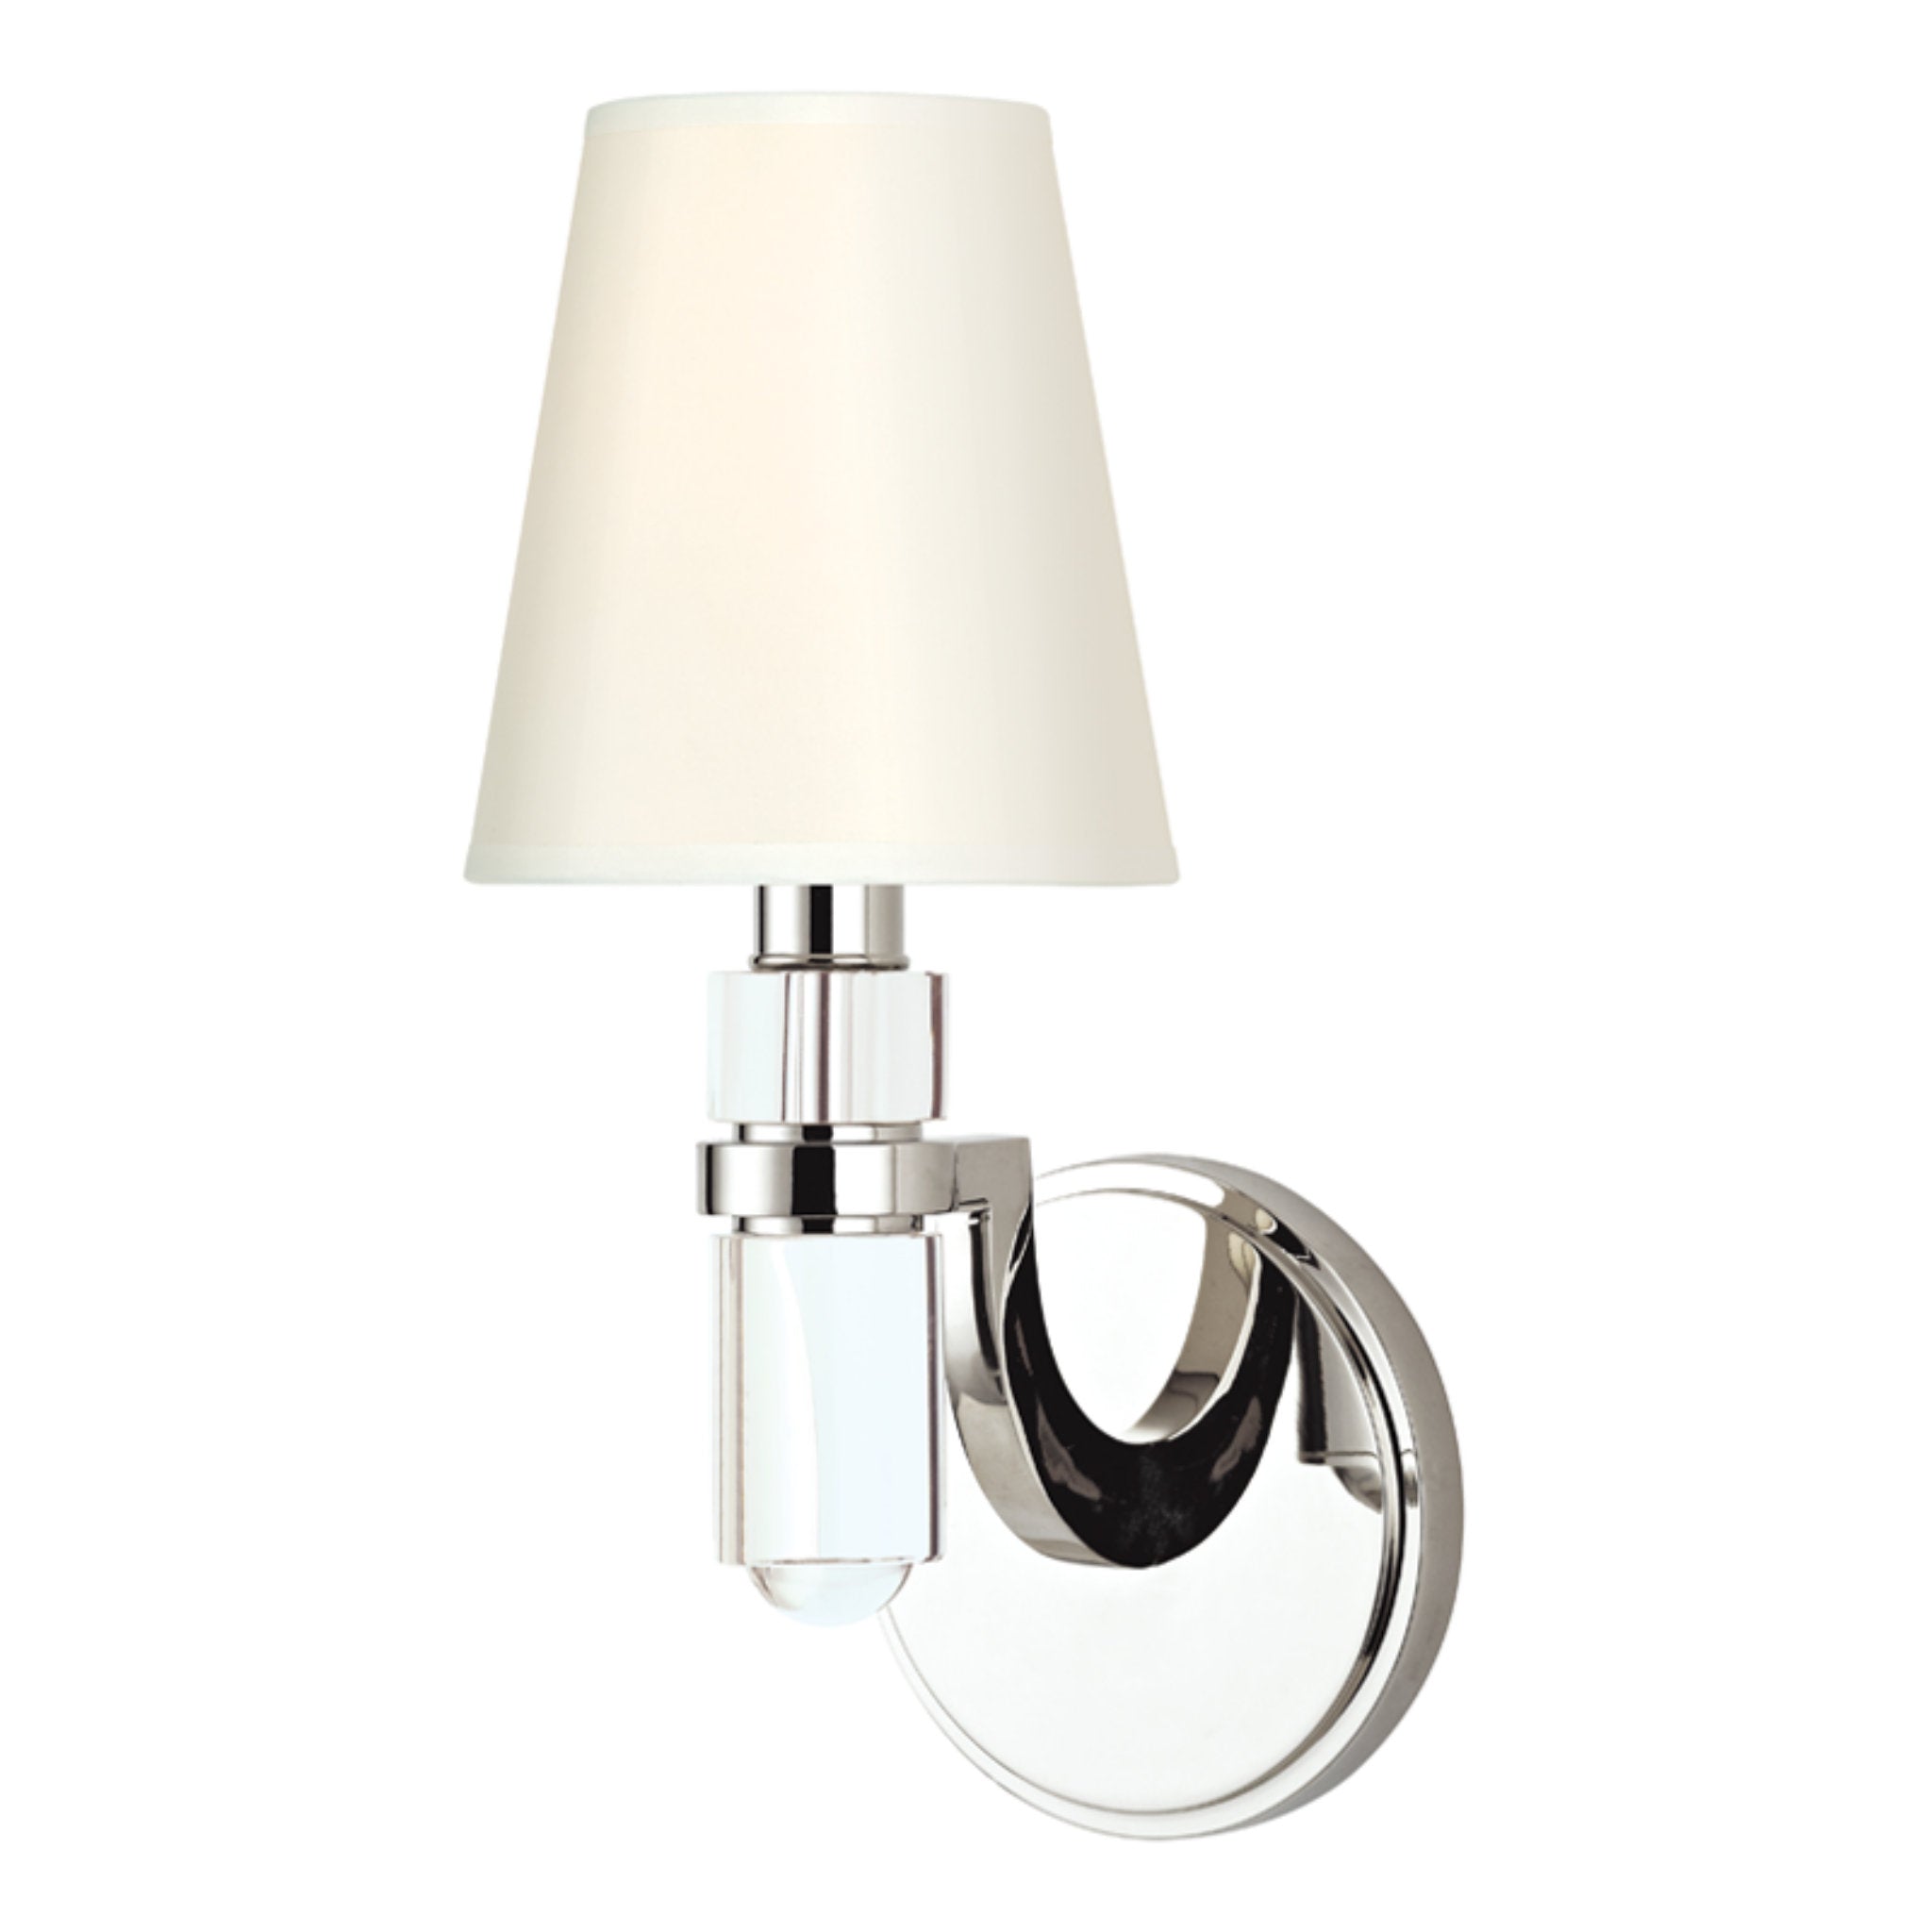 Dayton 1 Light Wall Sconce in Polished Nickel